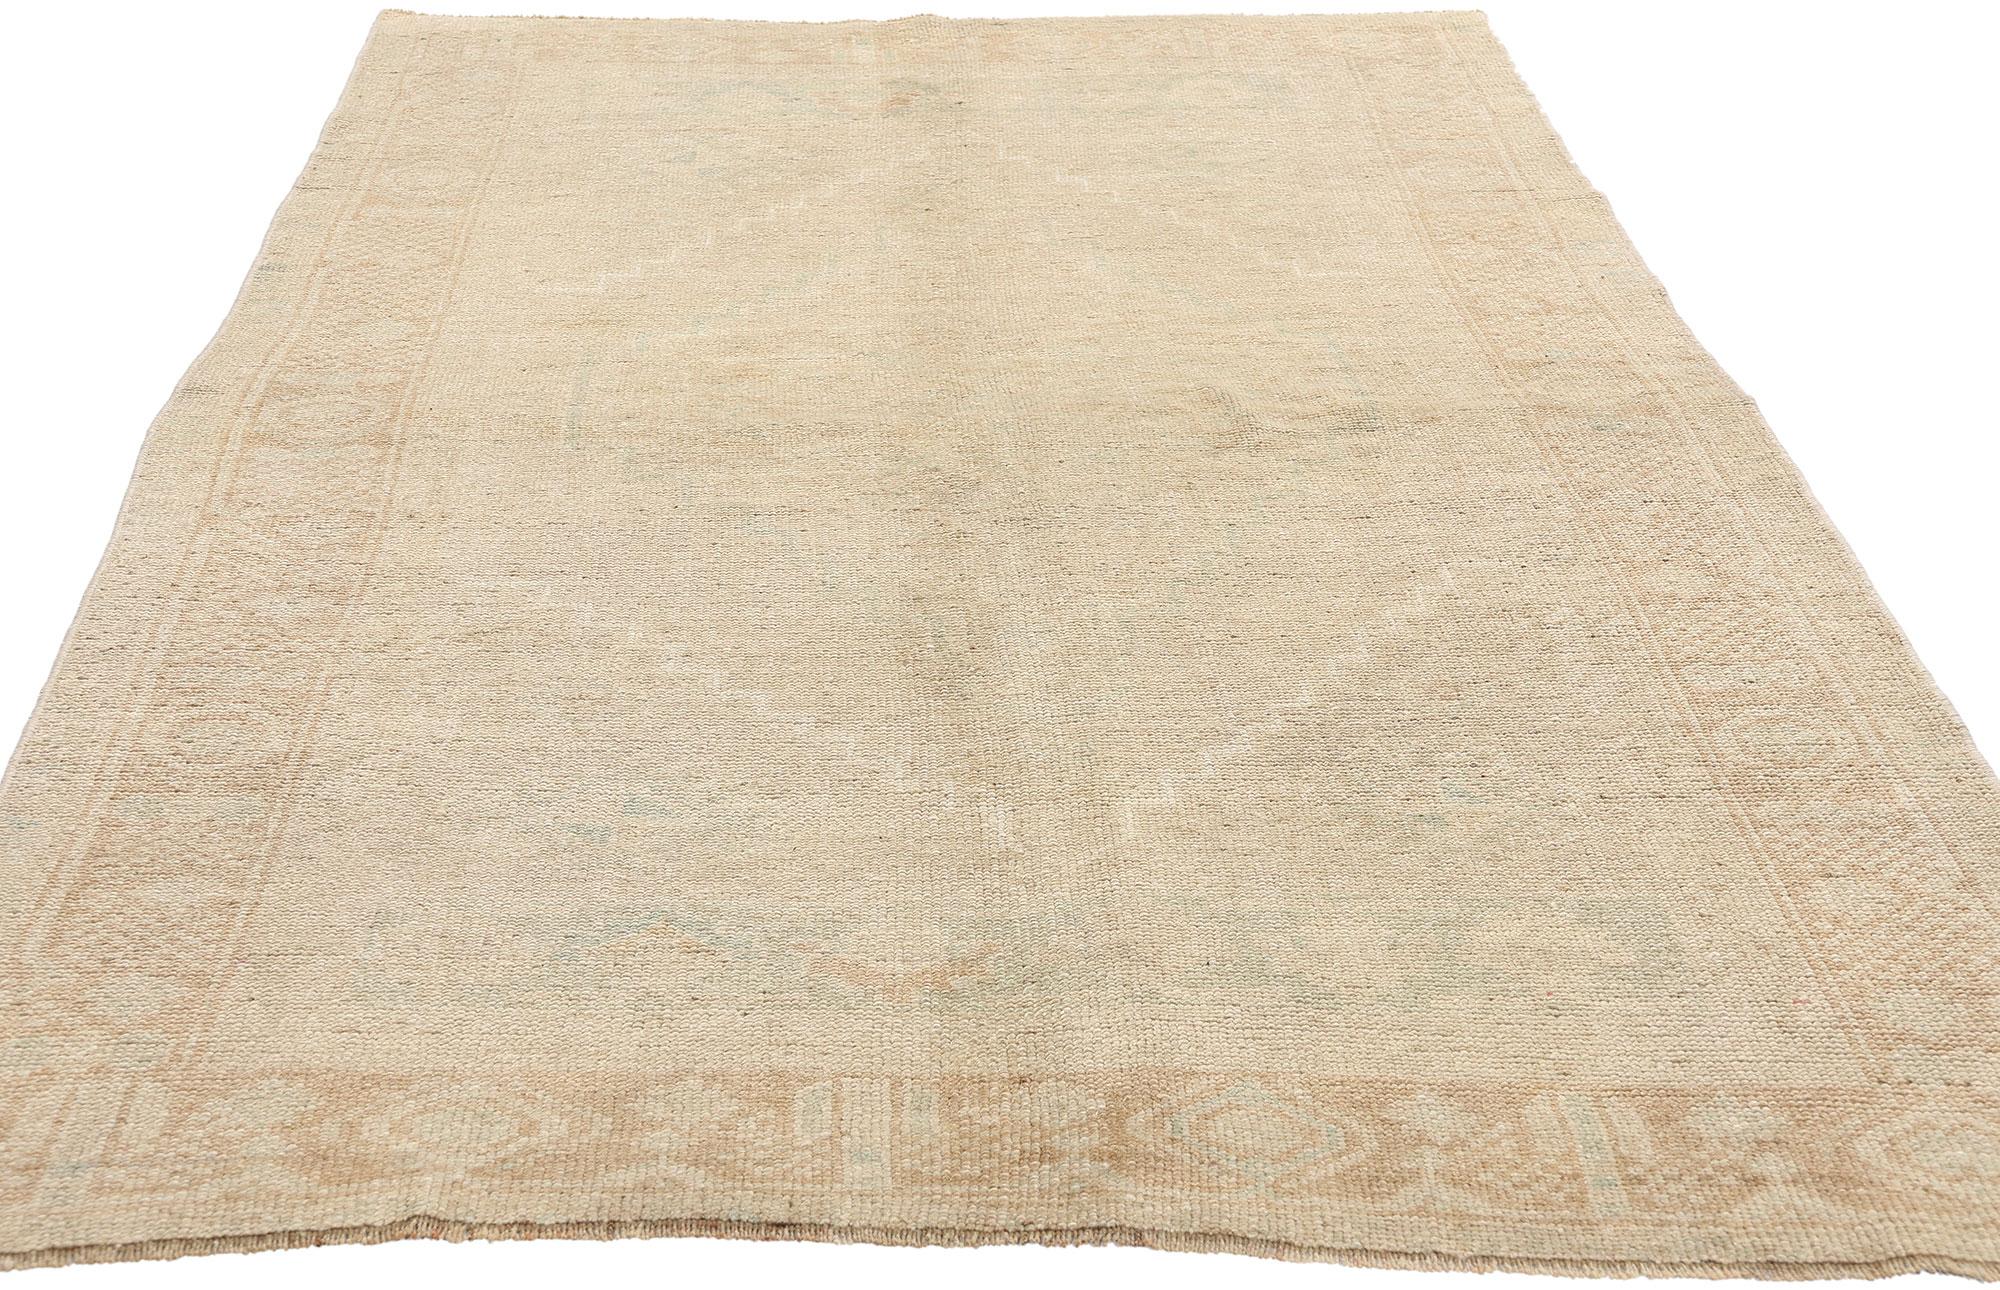 Tonal Vintage Turkish Oushak Rug Soft Earth-Tone Colors In Good Condition For Sale In Dallas, TX